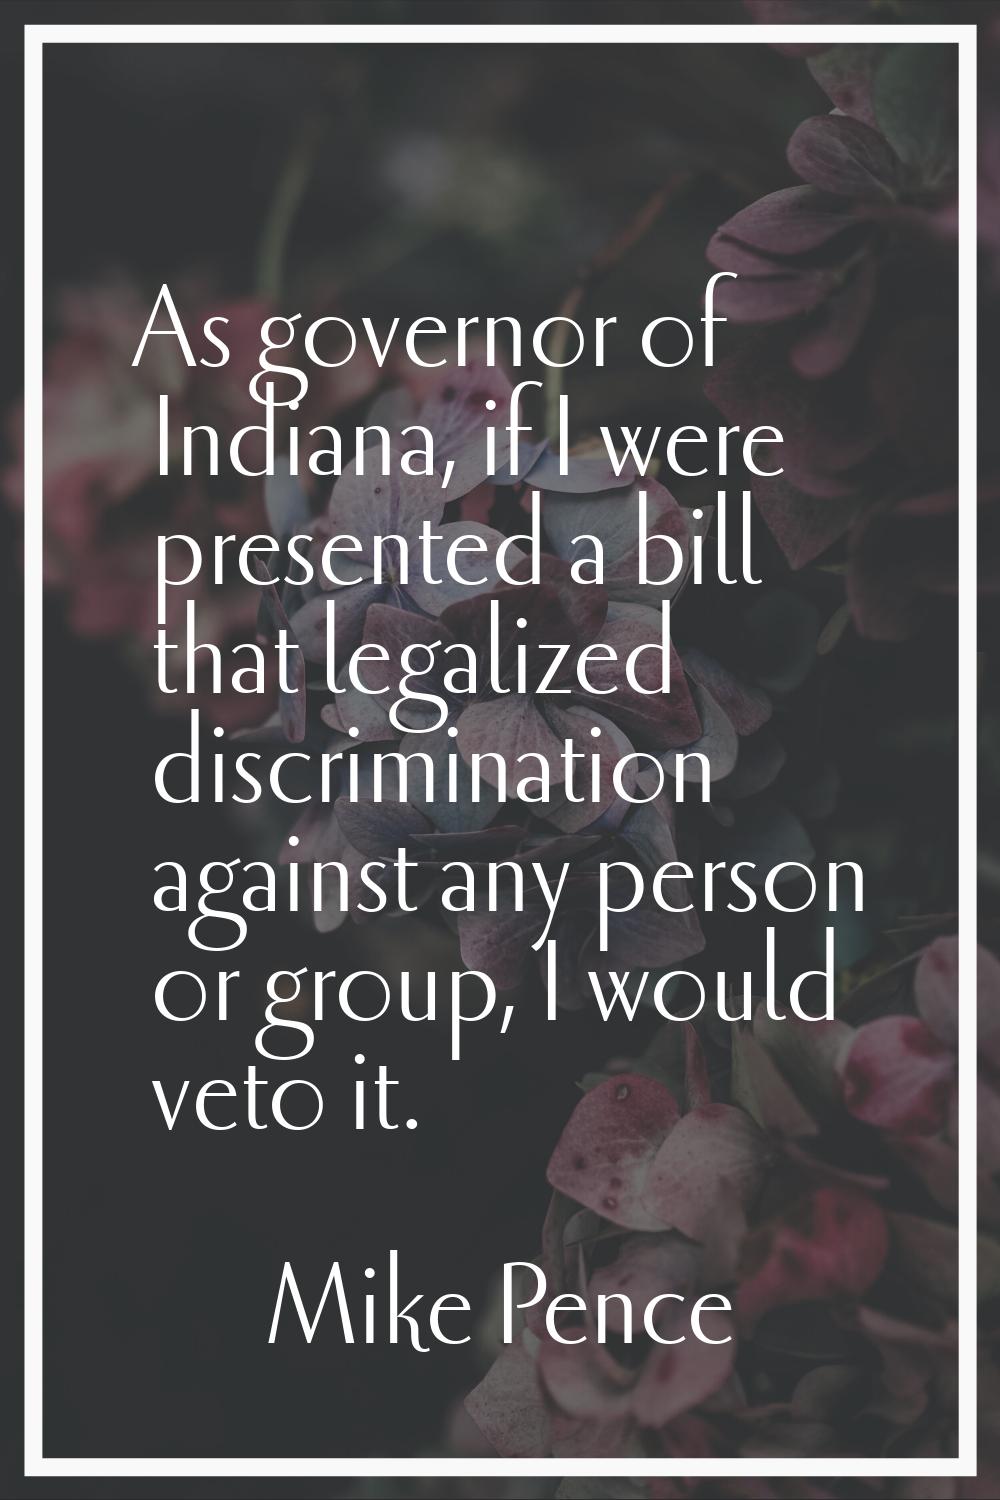 As governor of Indiana, if I were presented a bill that legalized discrimination against any person